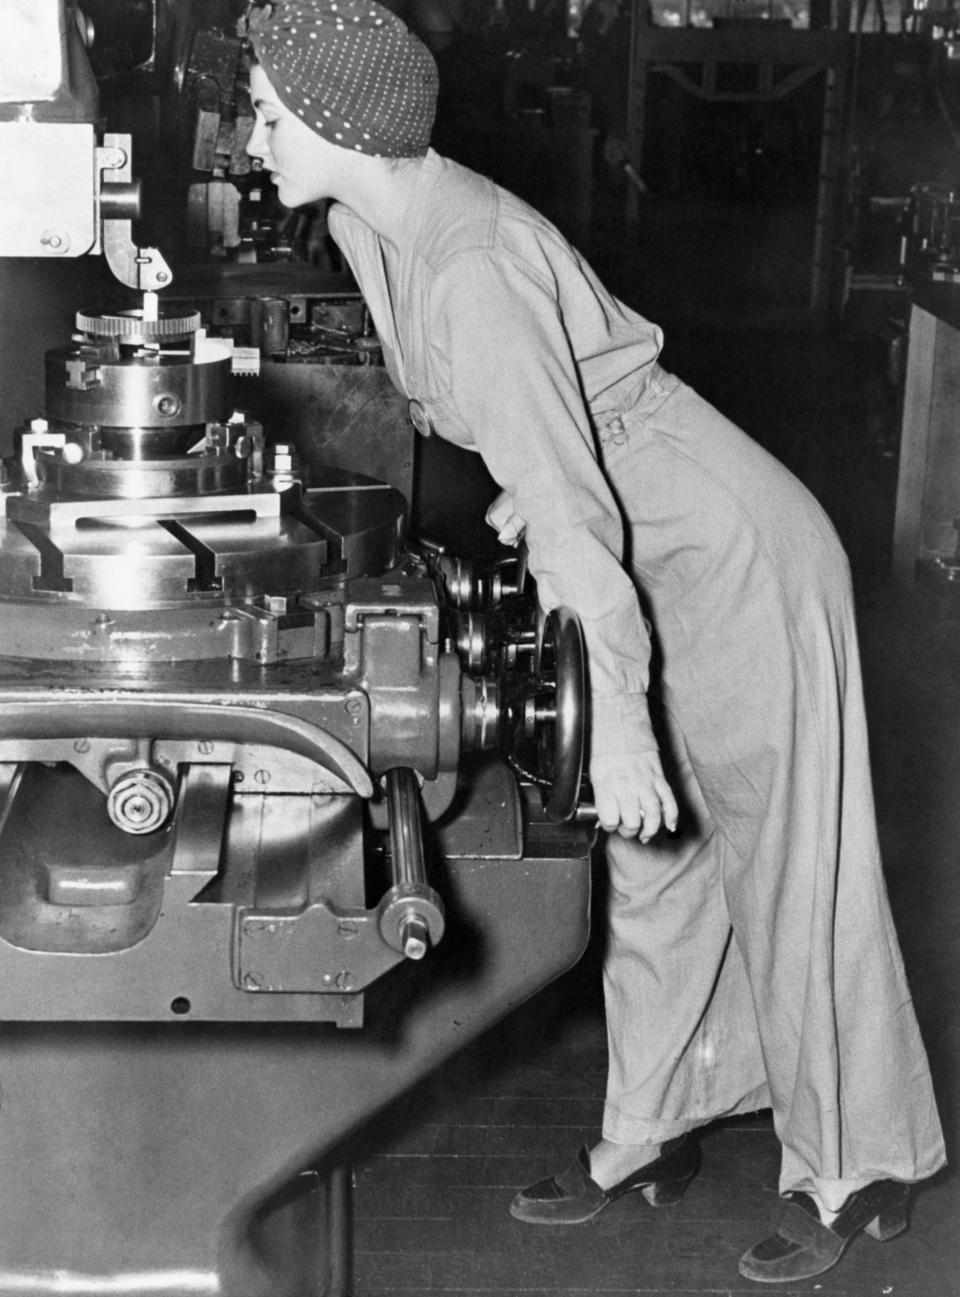 Naomi Parker, the inspiration behind "Rosie the Riveter"